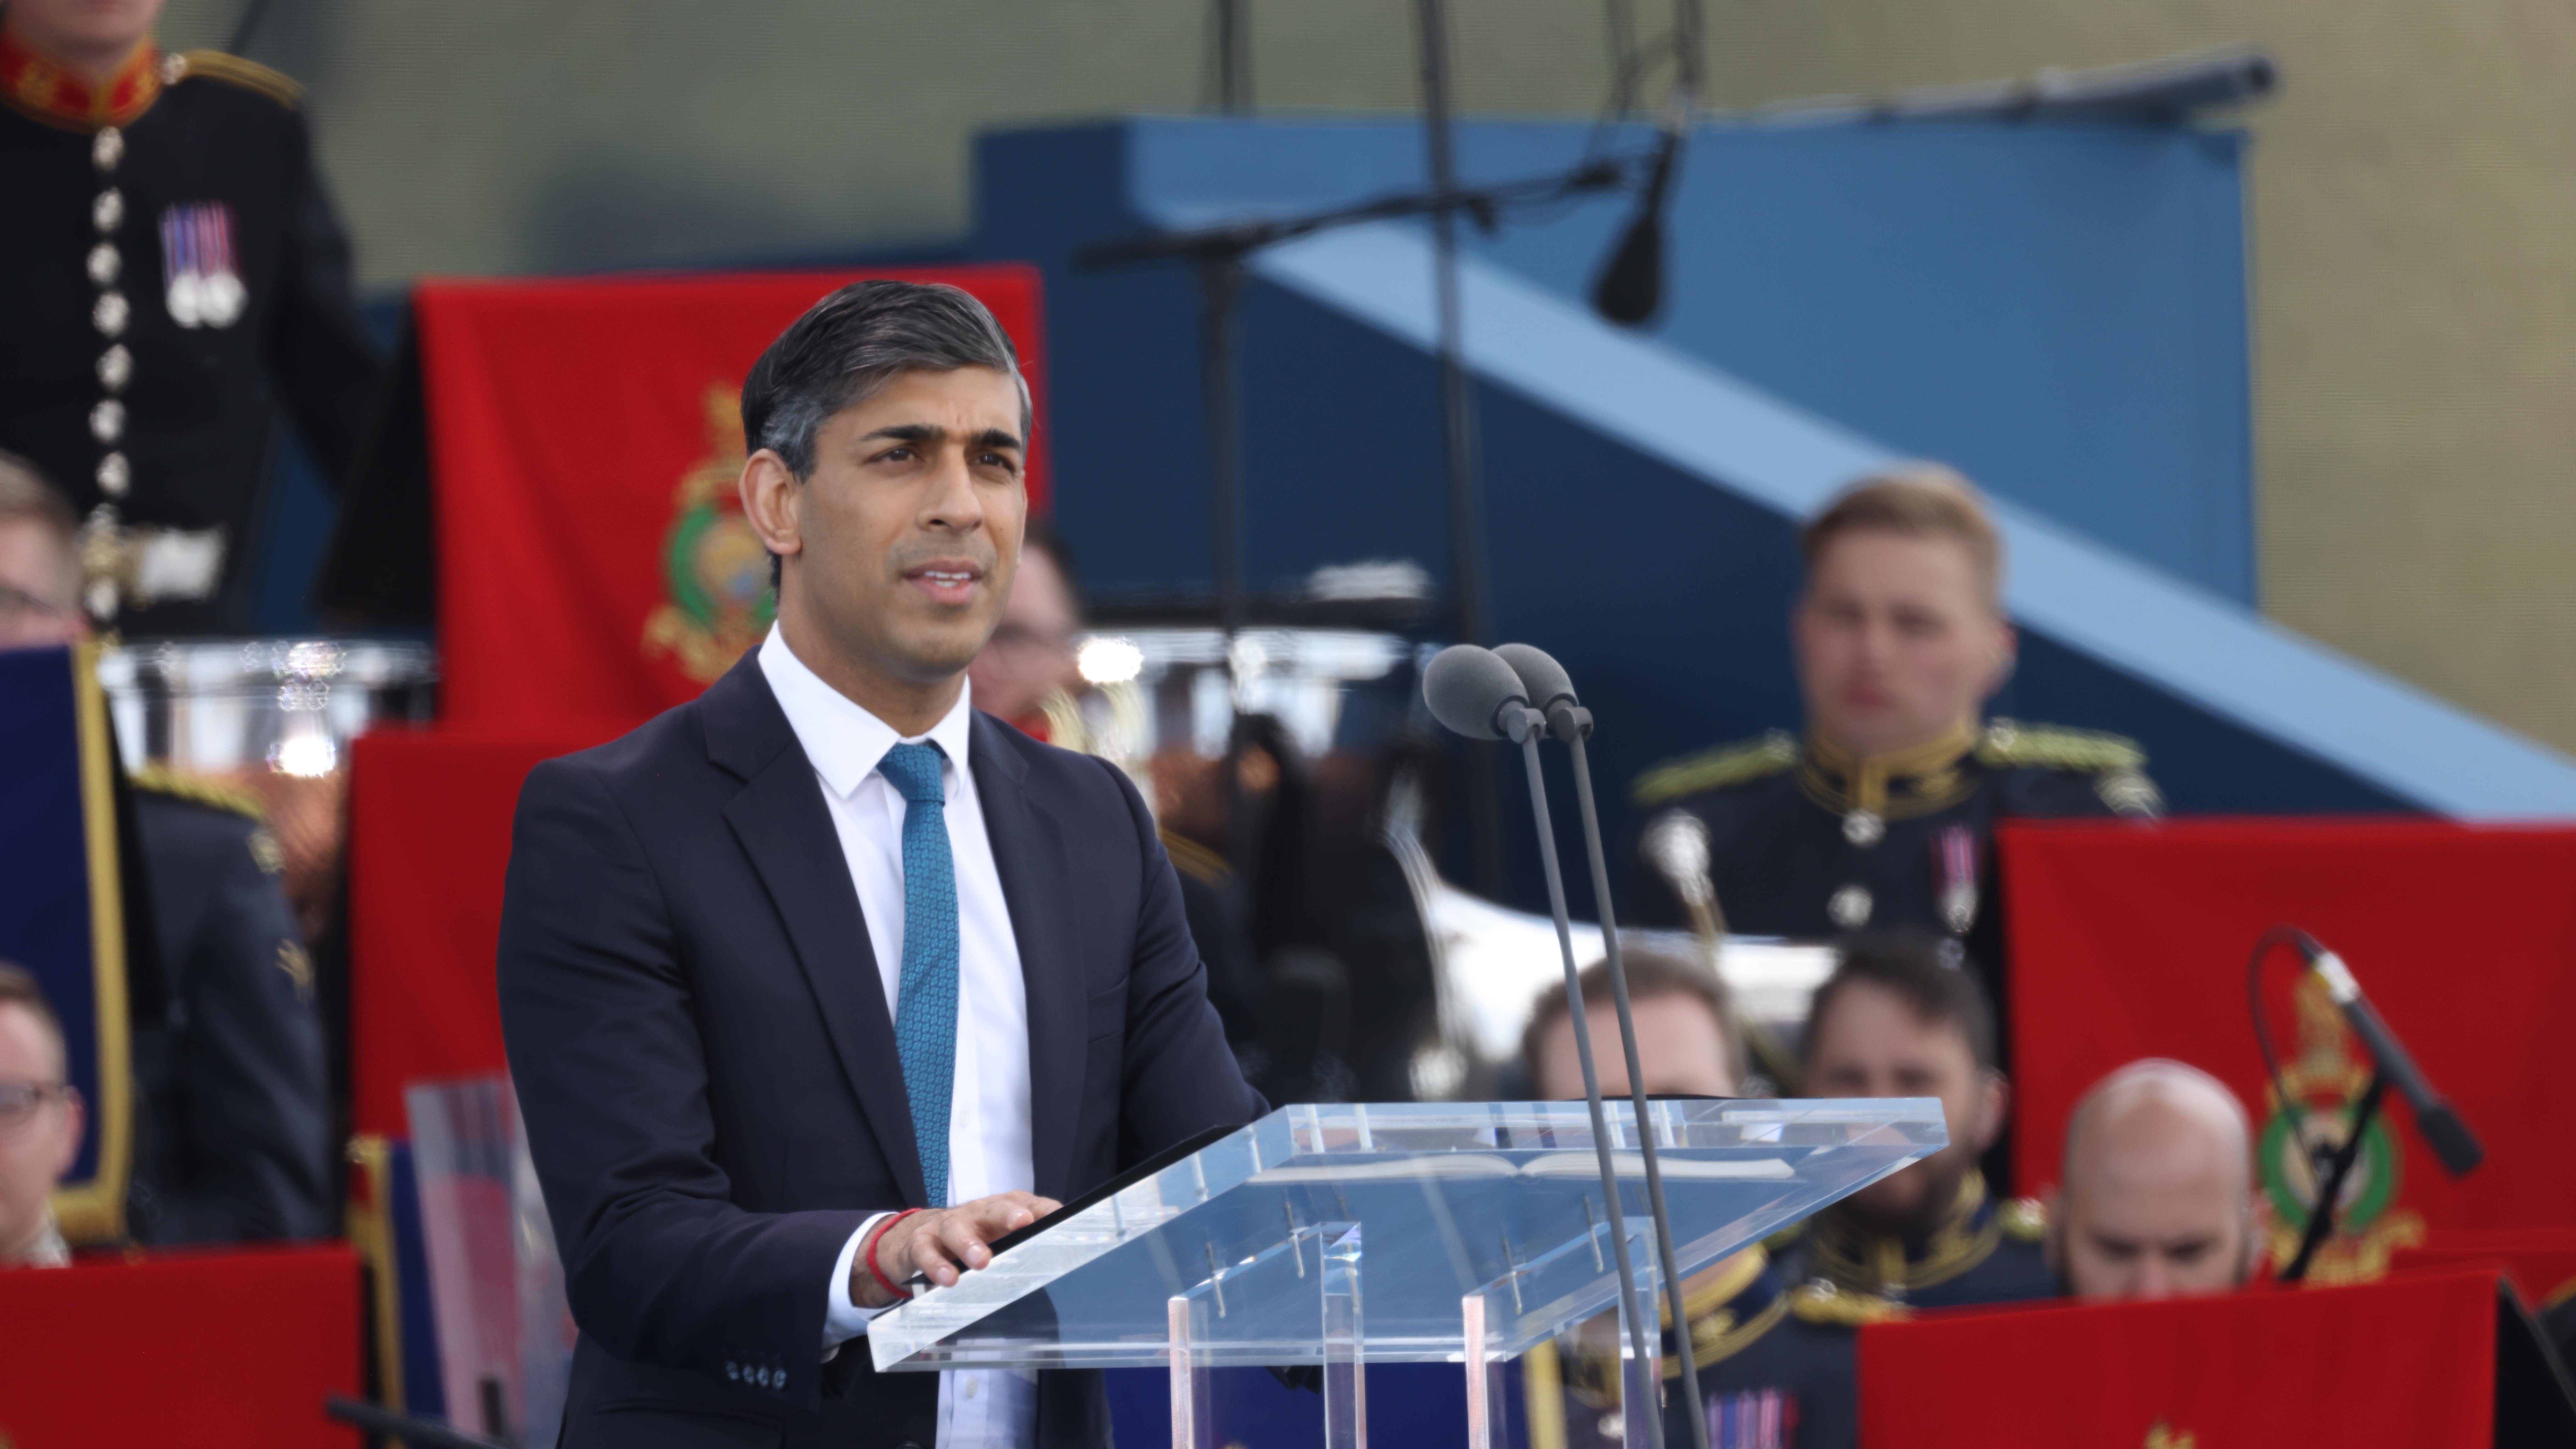 Sunak leaving D-Day events early to do TV interview was ‘a mistake’ – Mercer